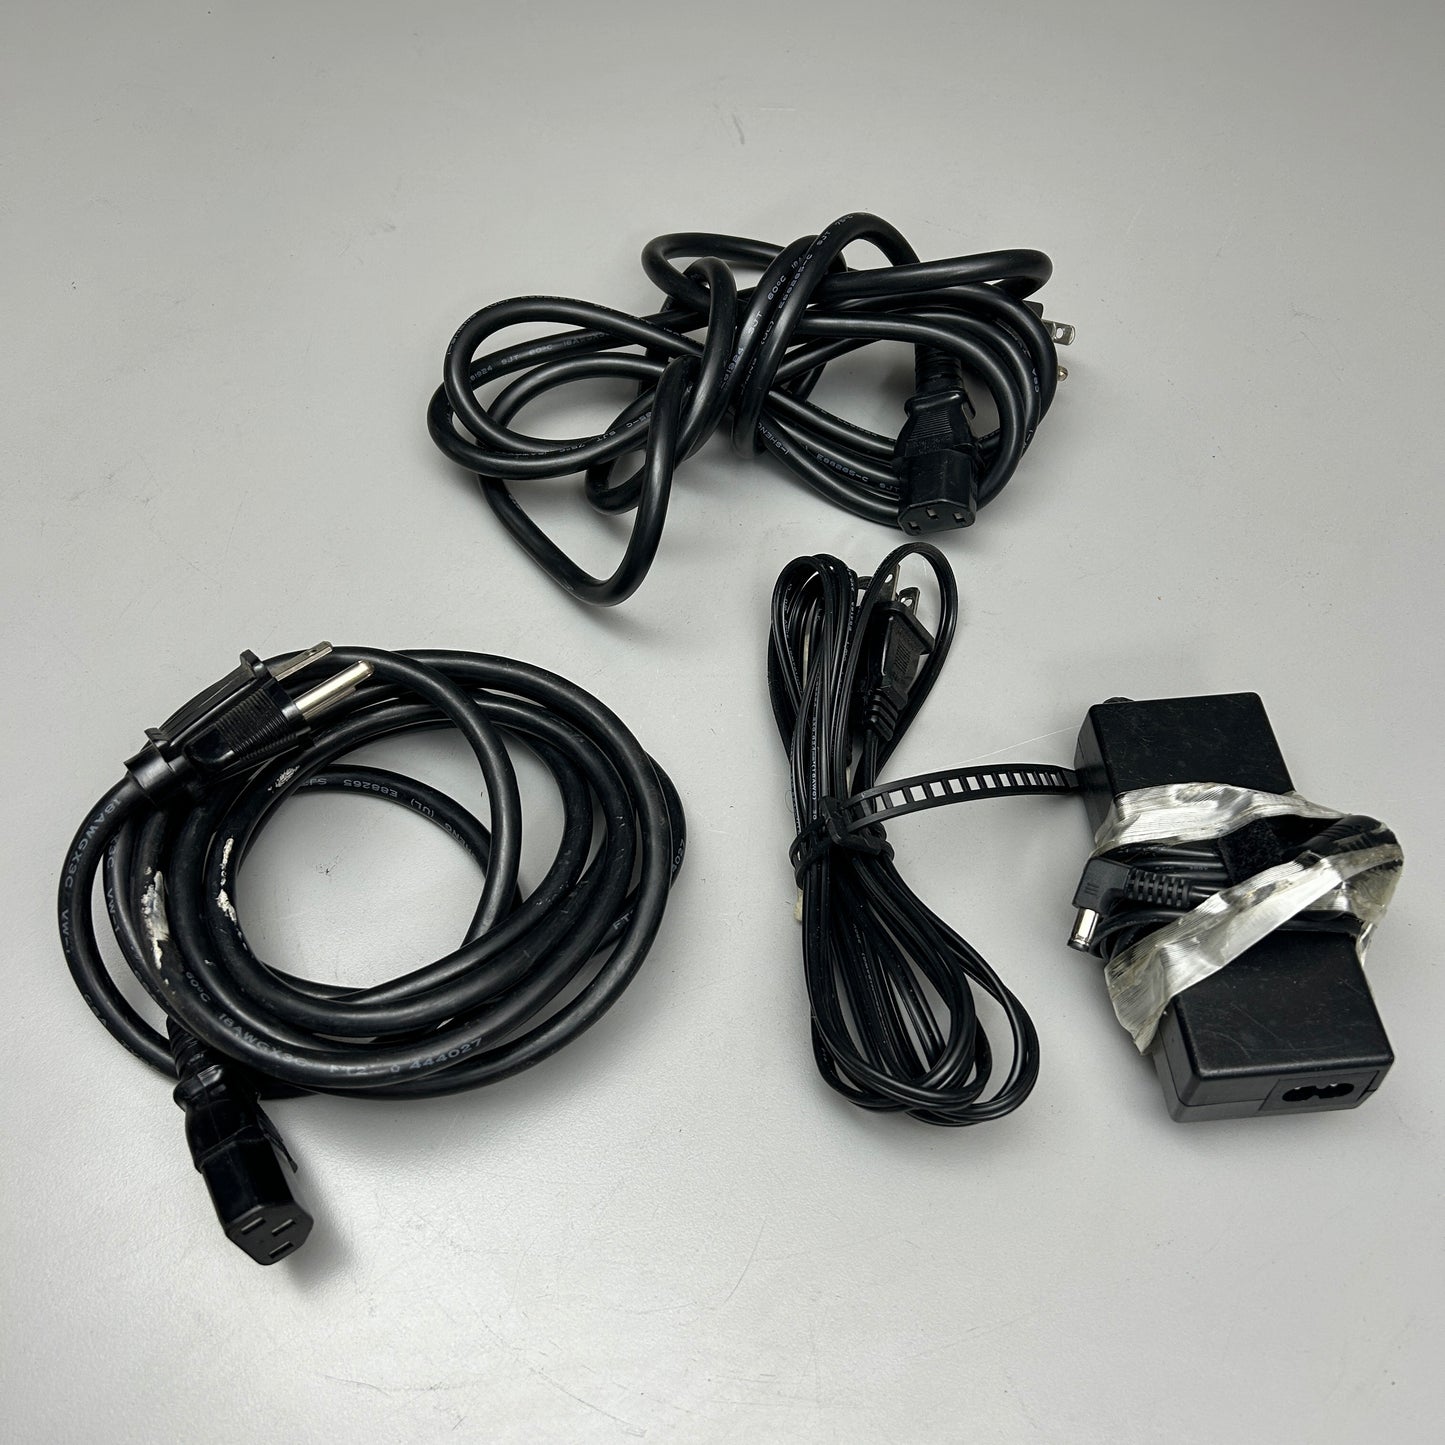 Lot of ROLAND Printer Parts and Power Cords